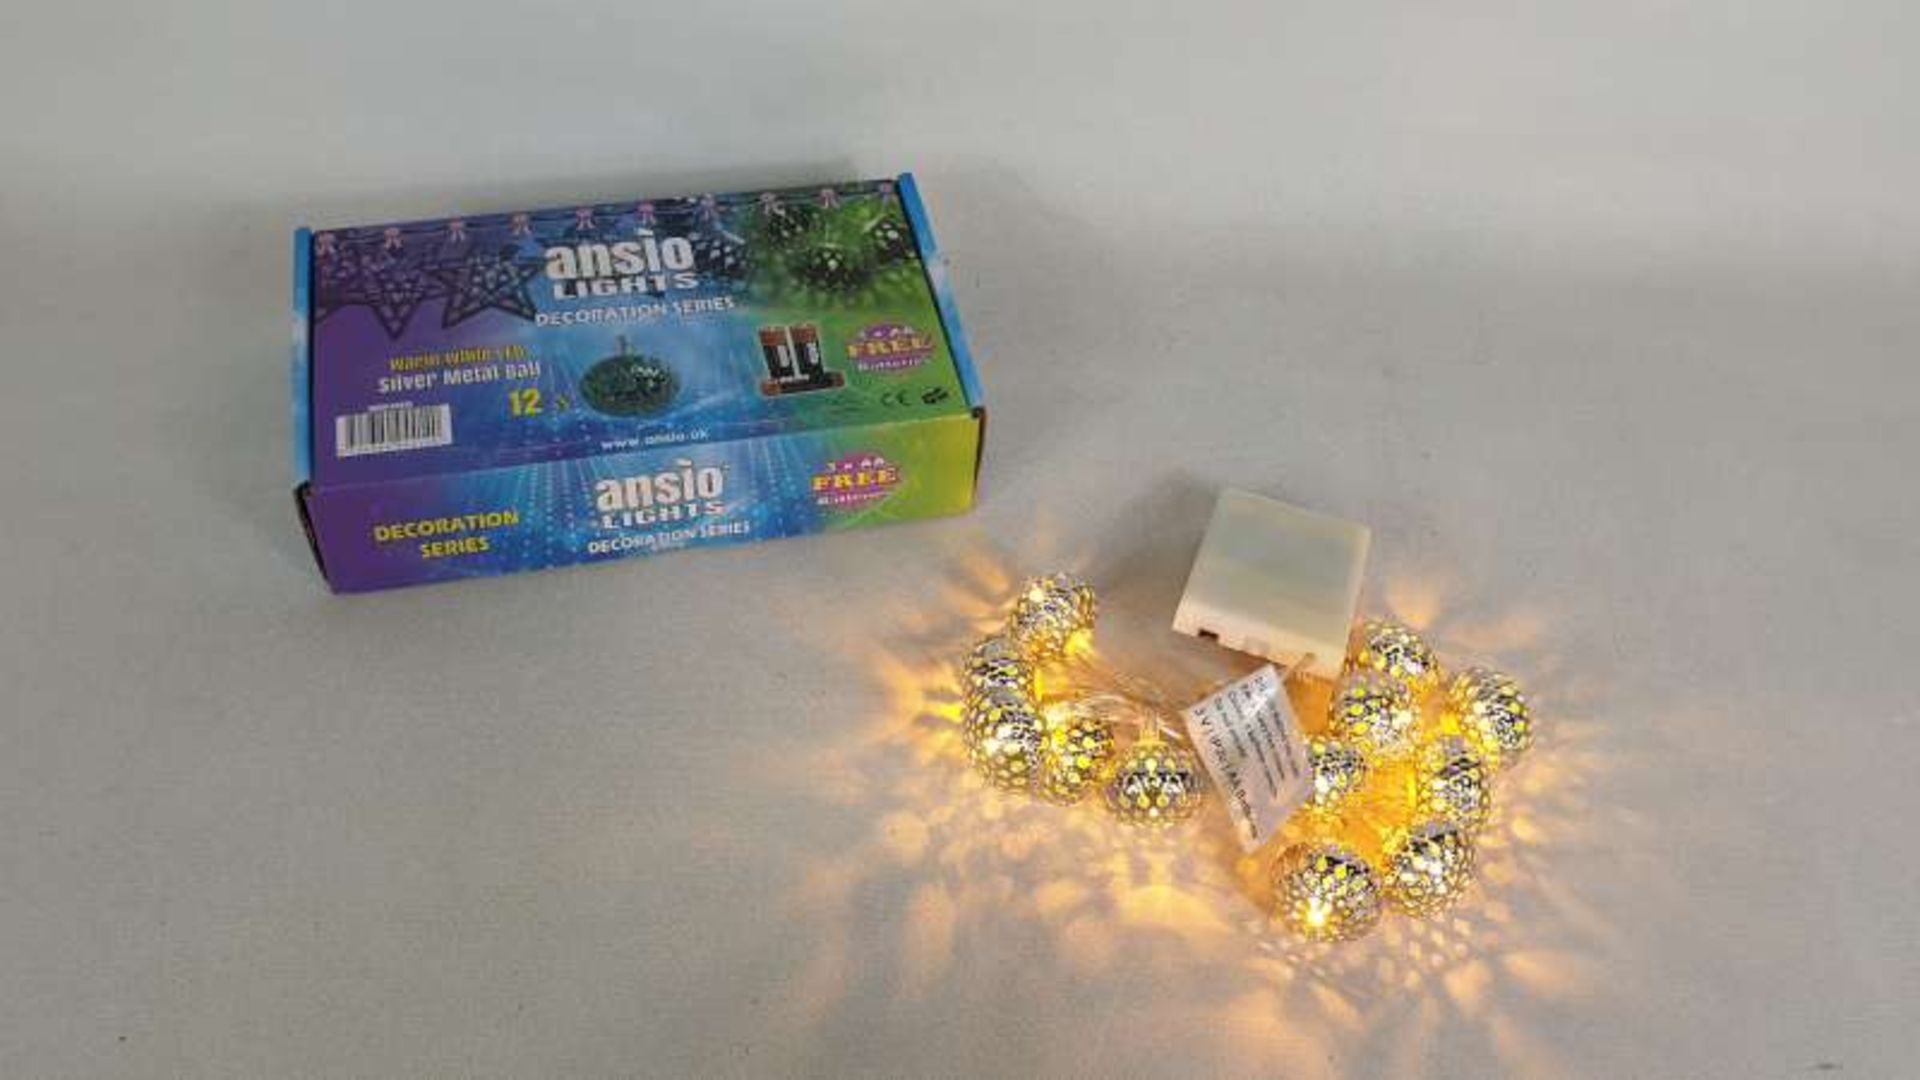 50 X WARM WHITE LED SILVER METAL BALL LIGHTS IN 2 BOXES